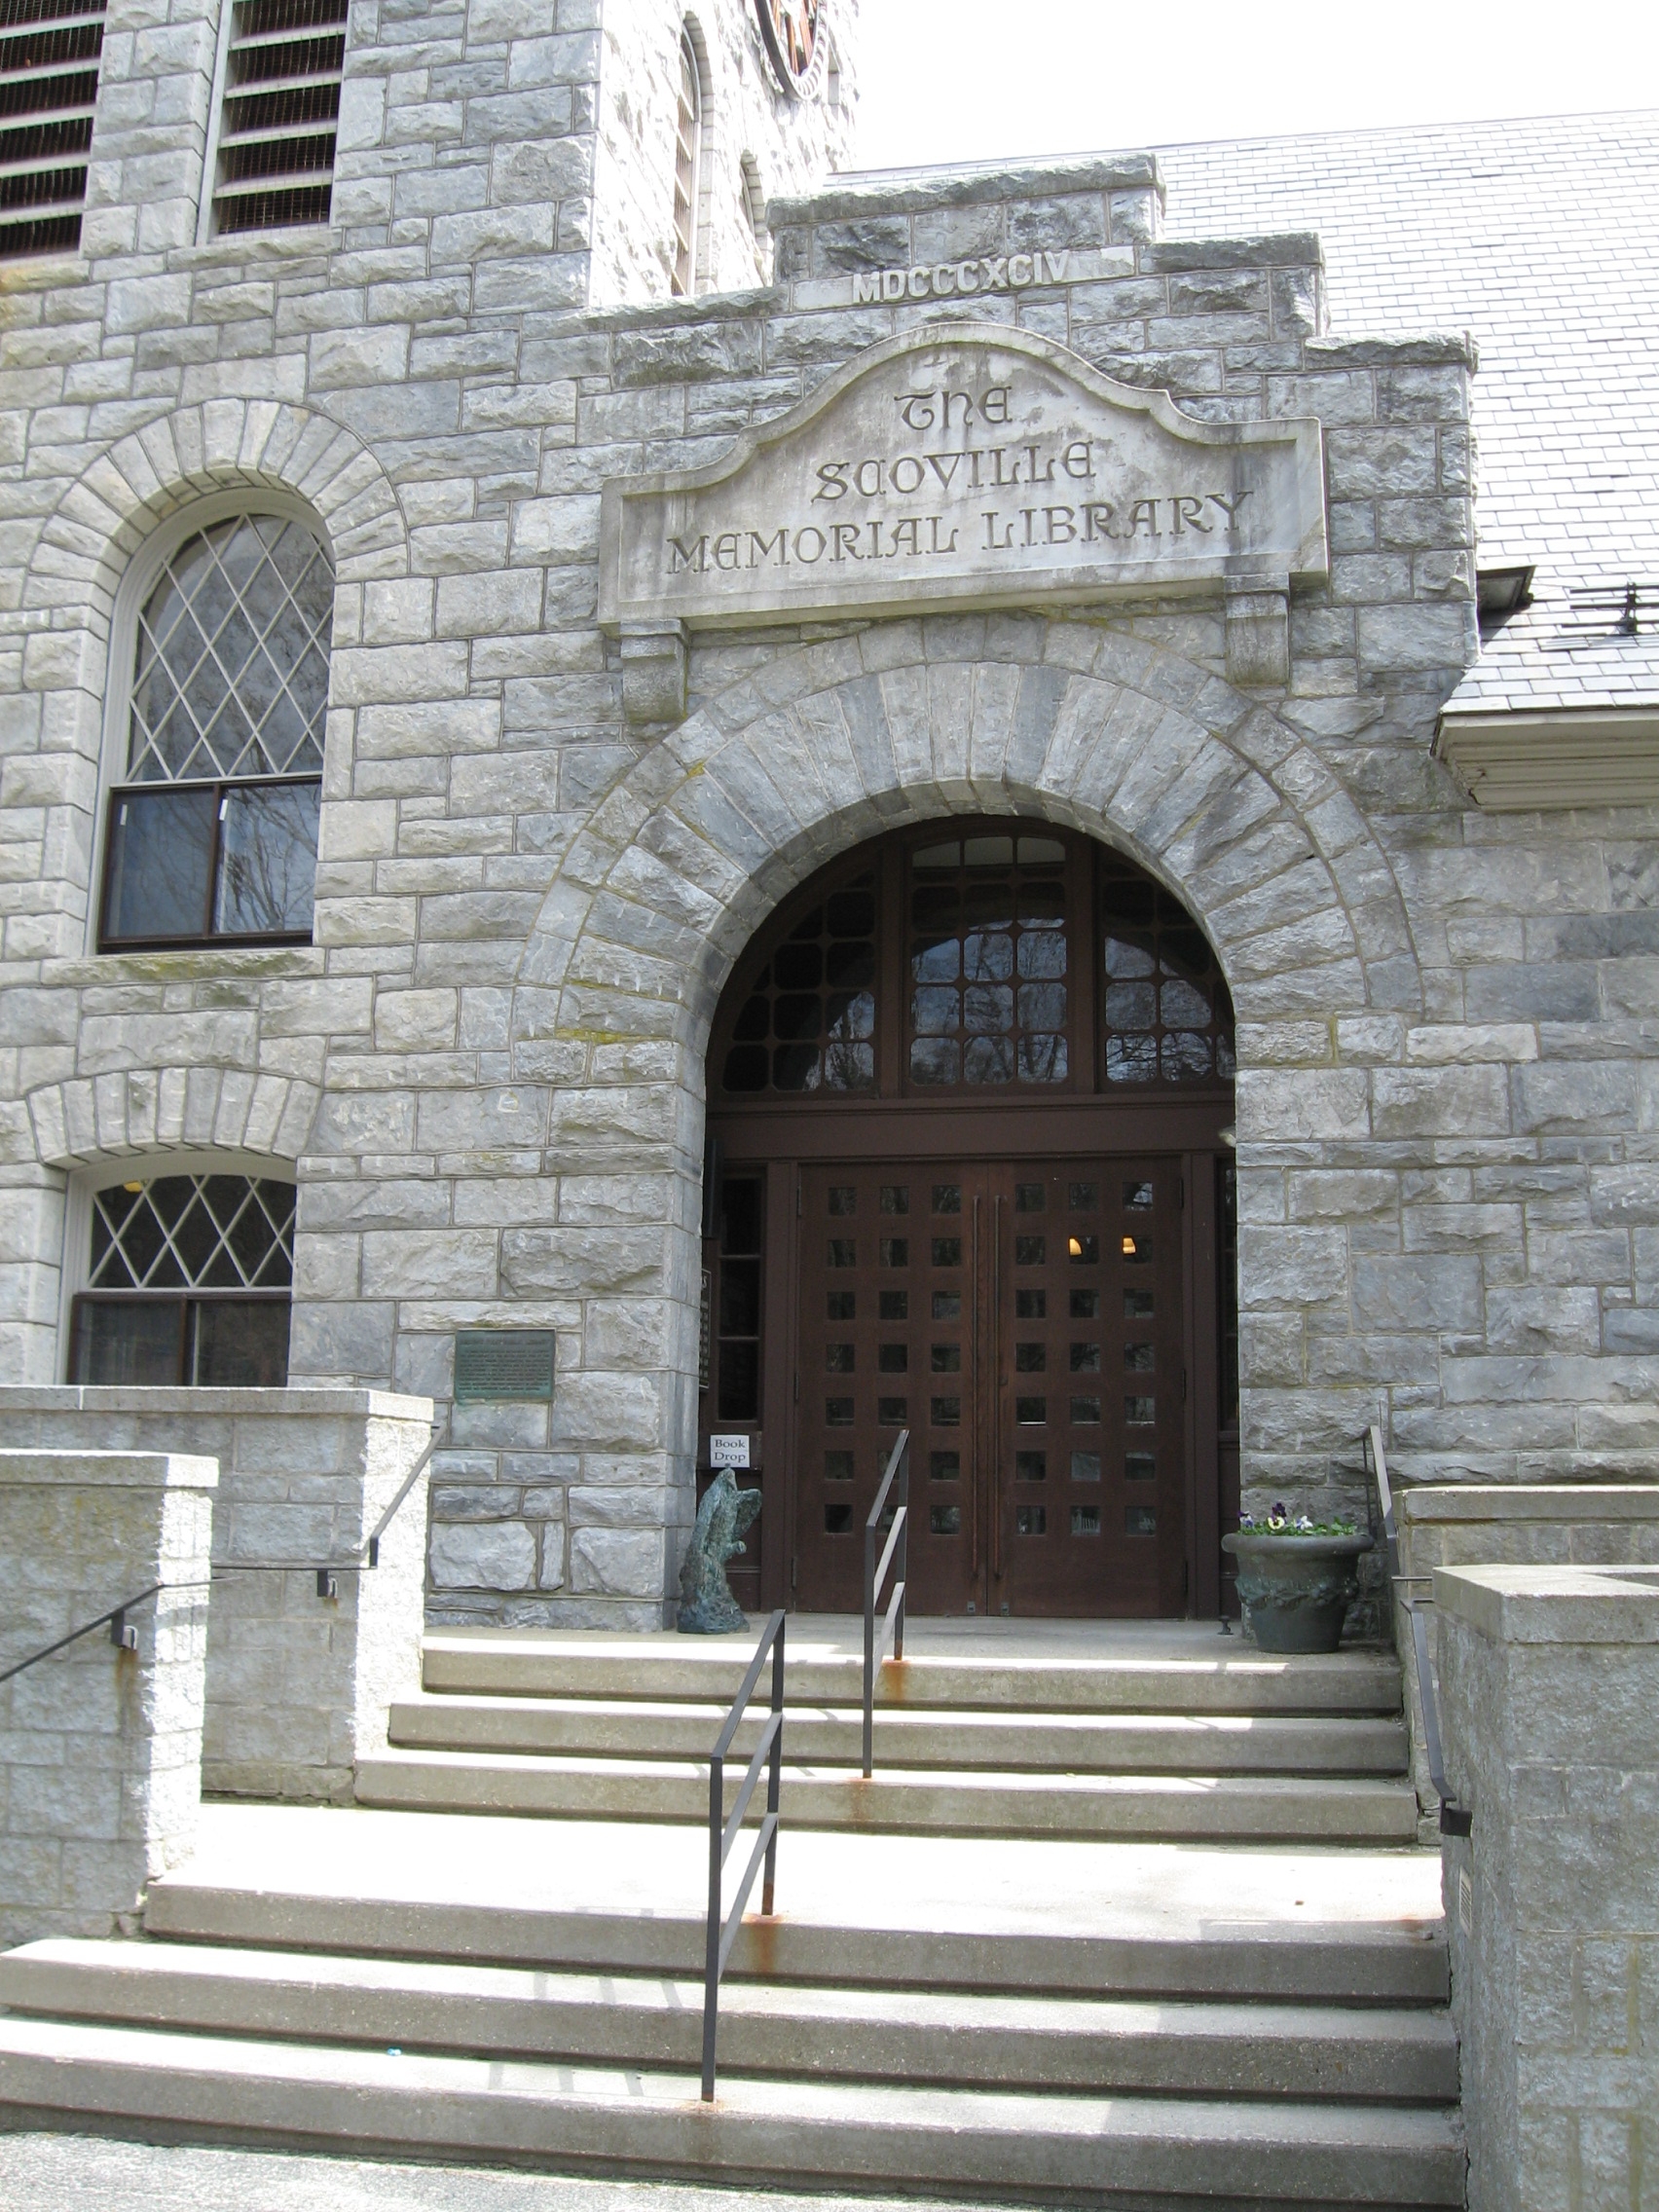 The Entrance to the Scoville Memorial Library